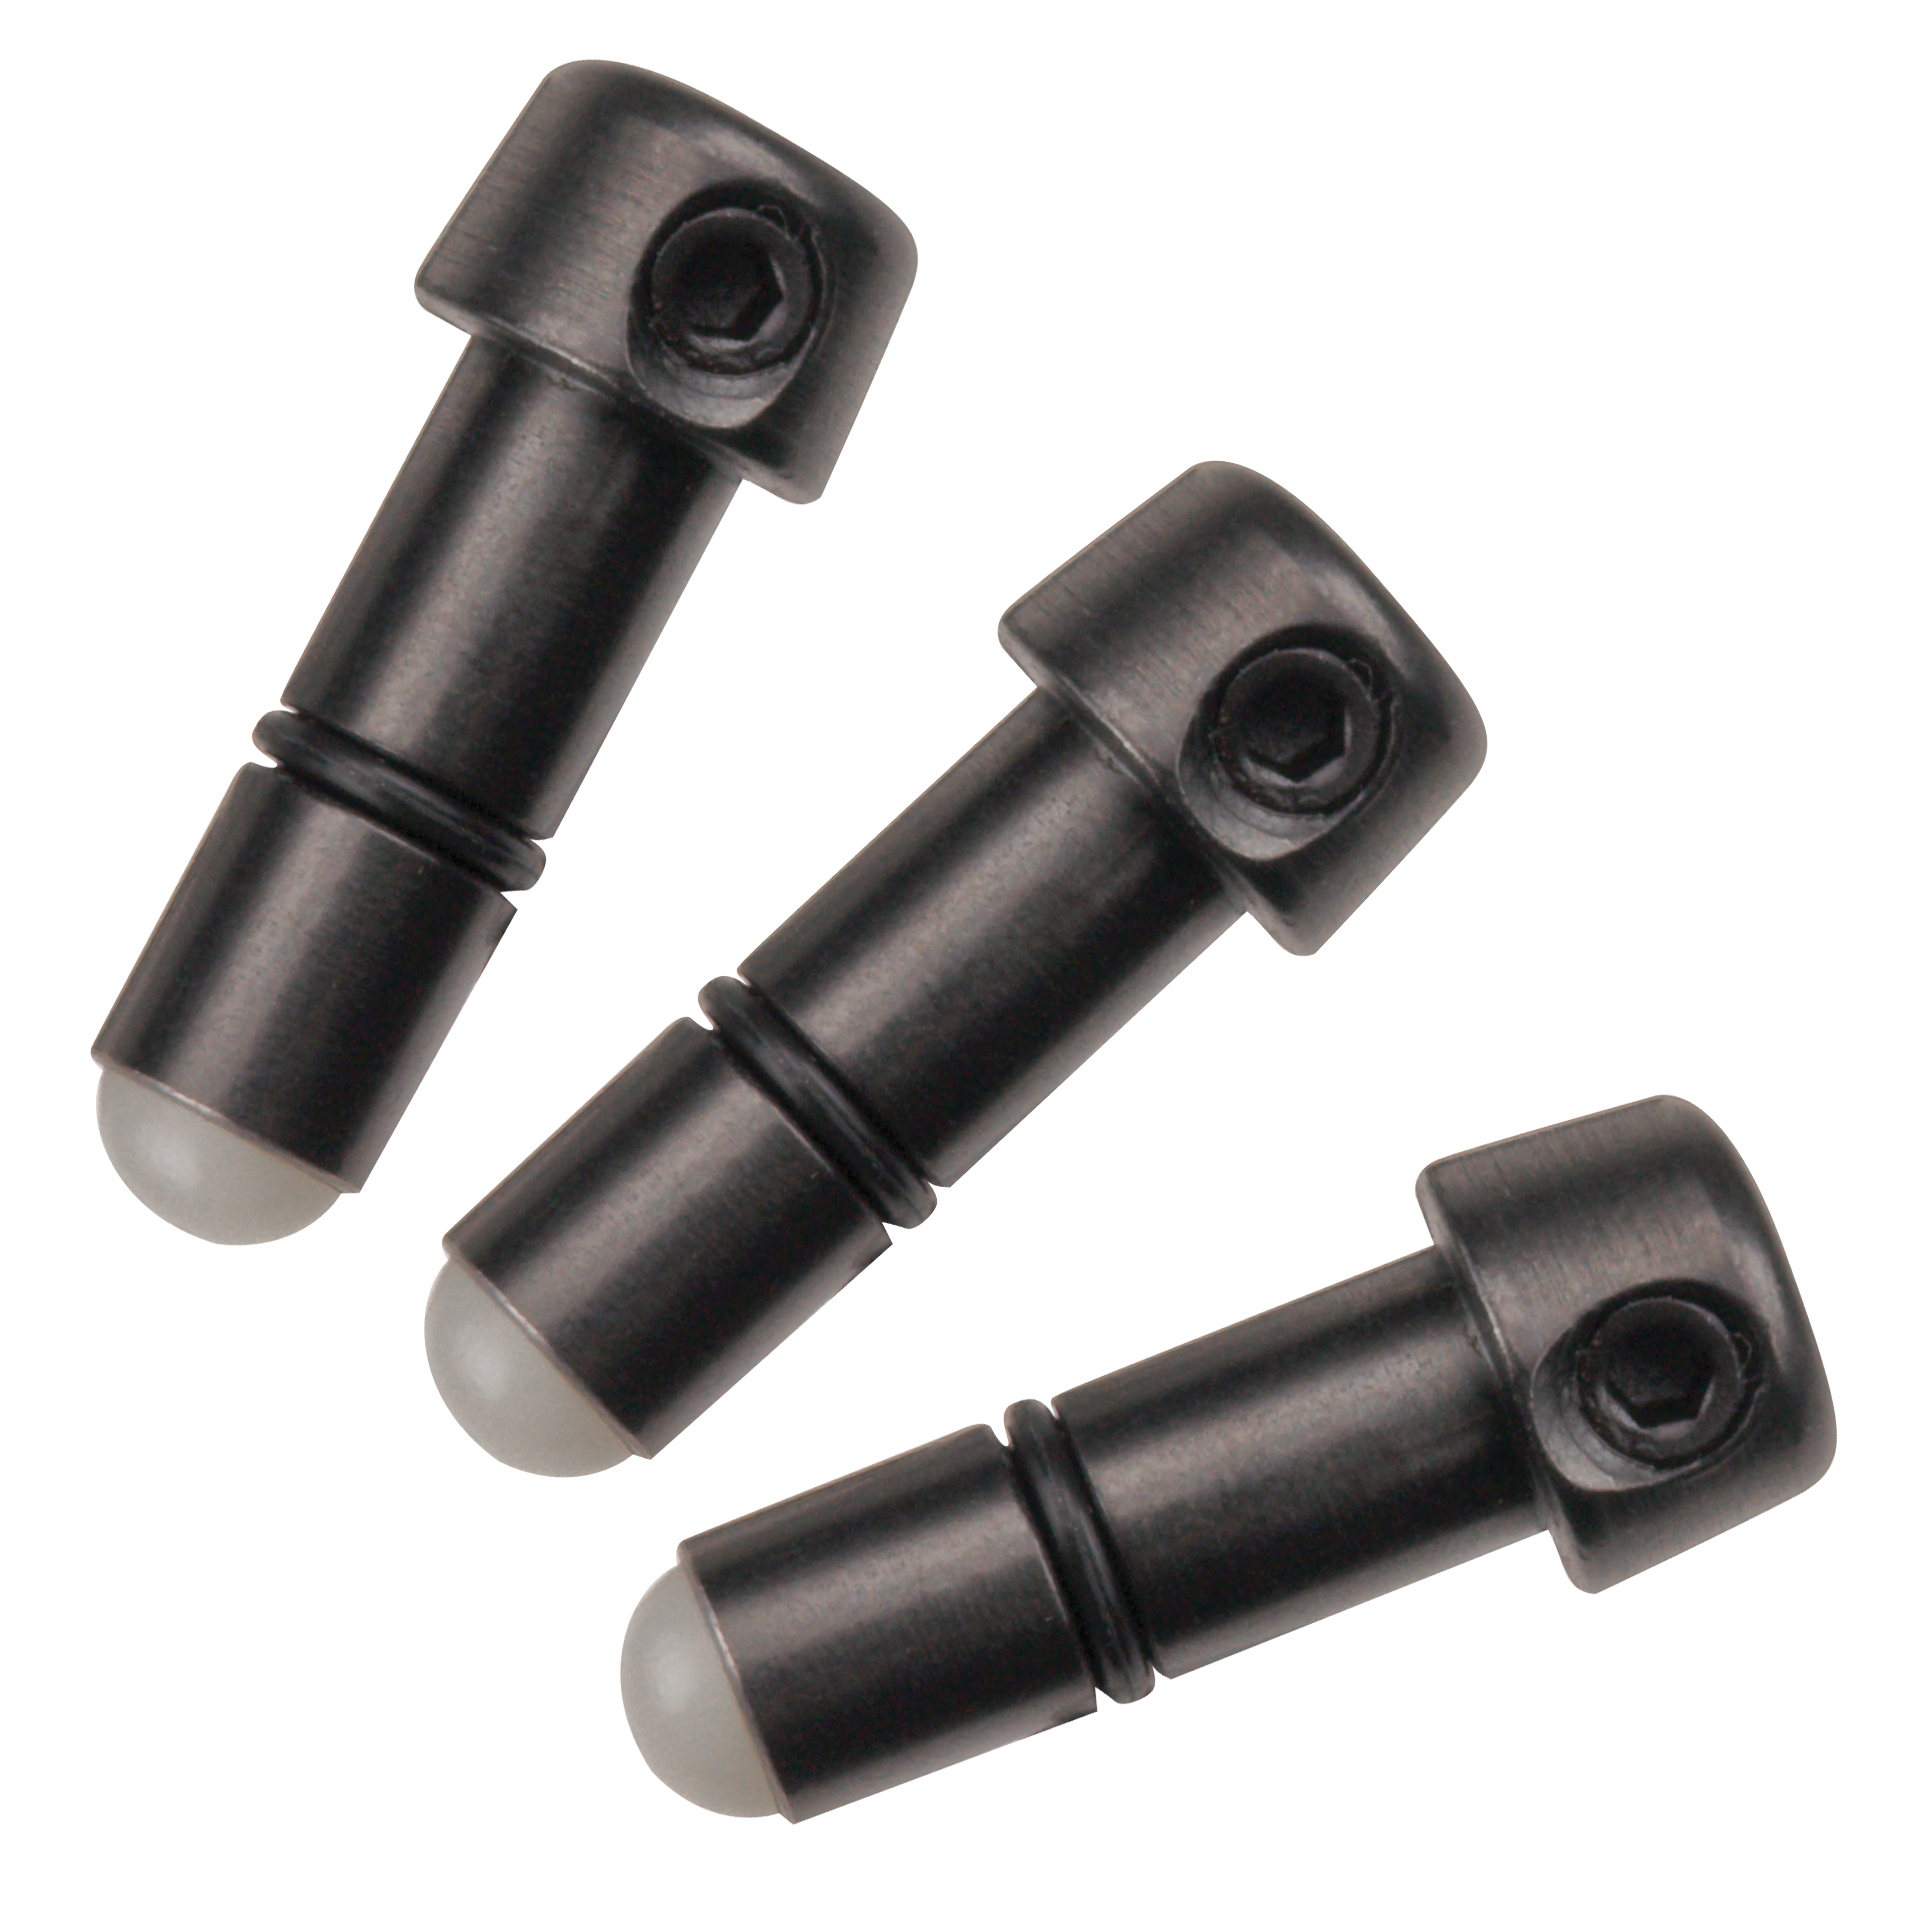 GRS graver holder inserts set with dampers, Contents: 3 pcs